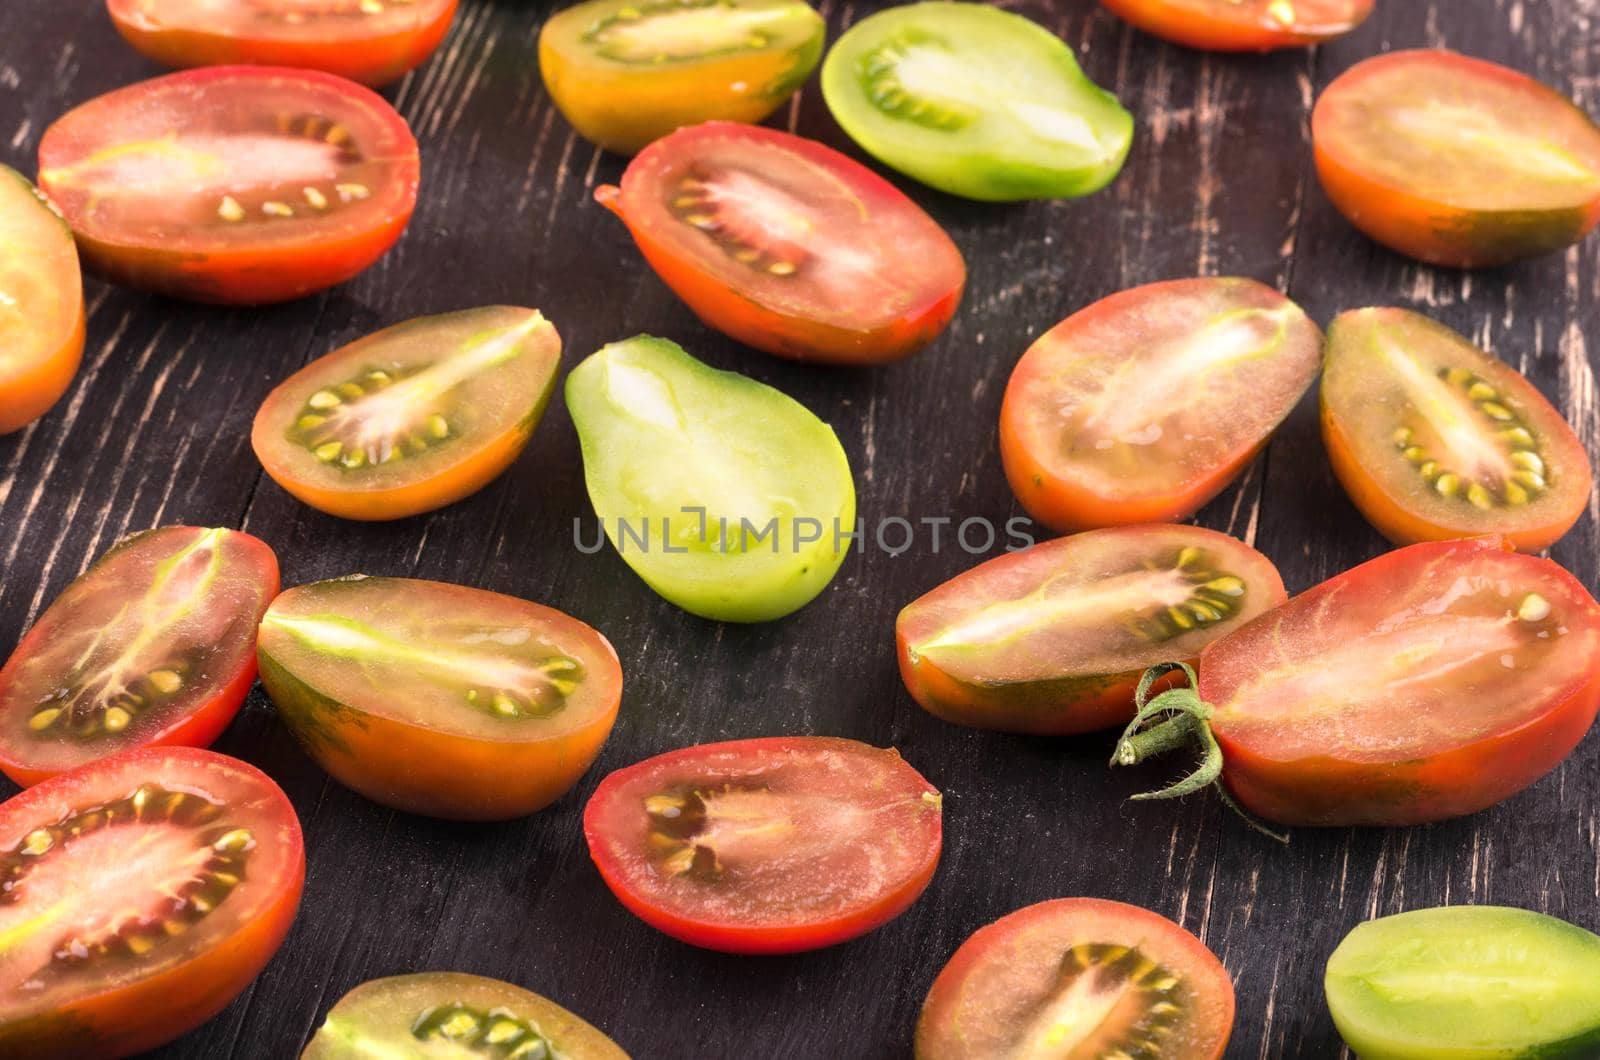 Tomatoes on the board by andregric